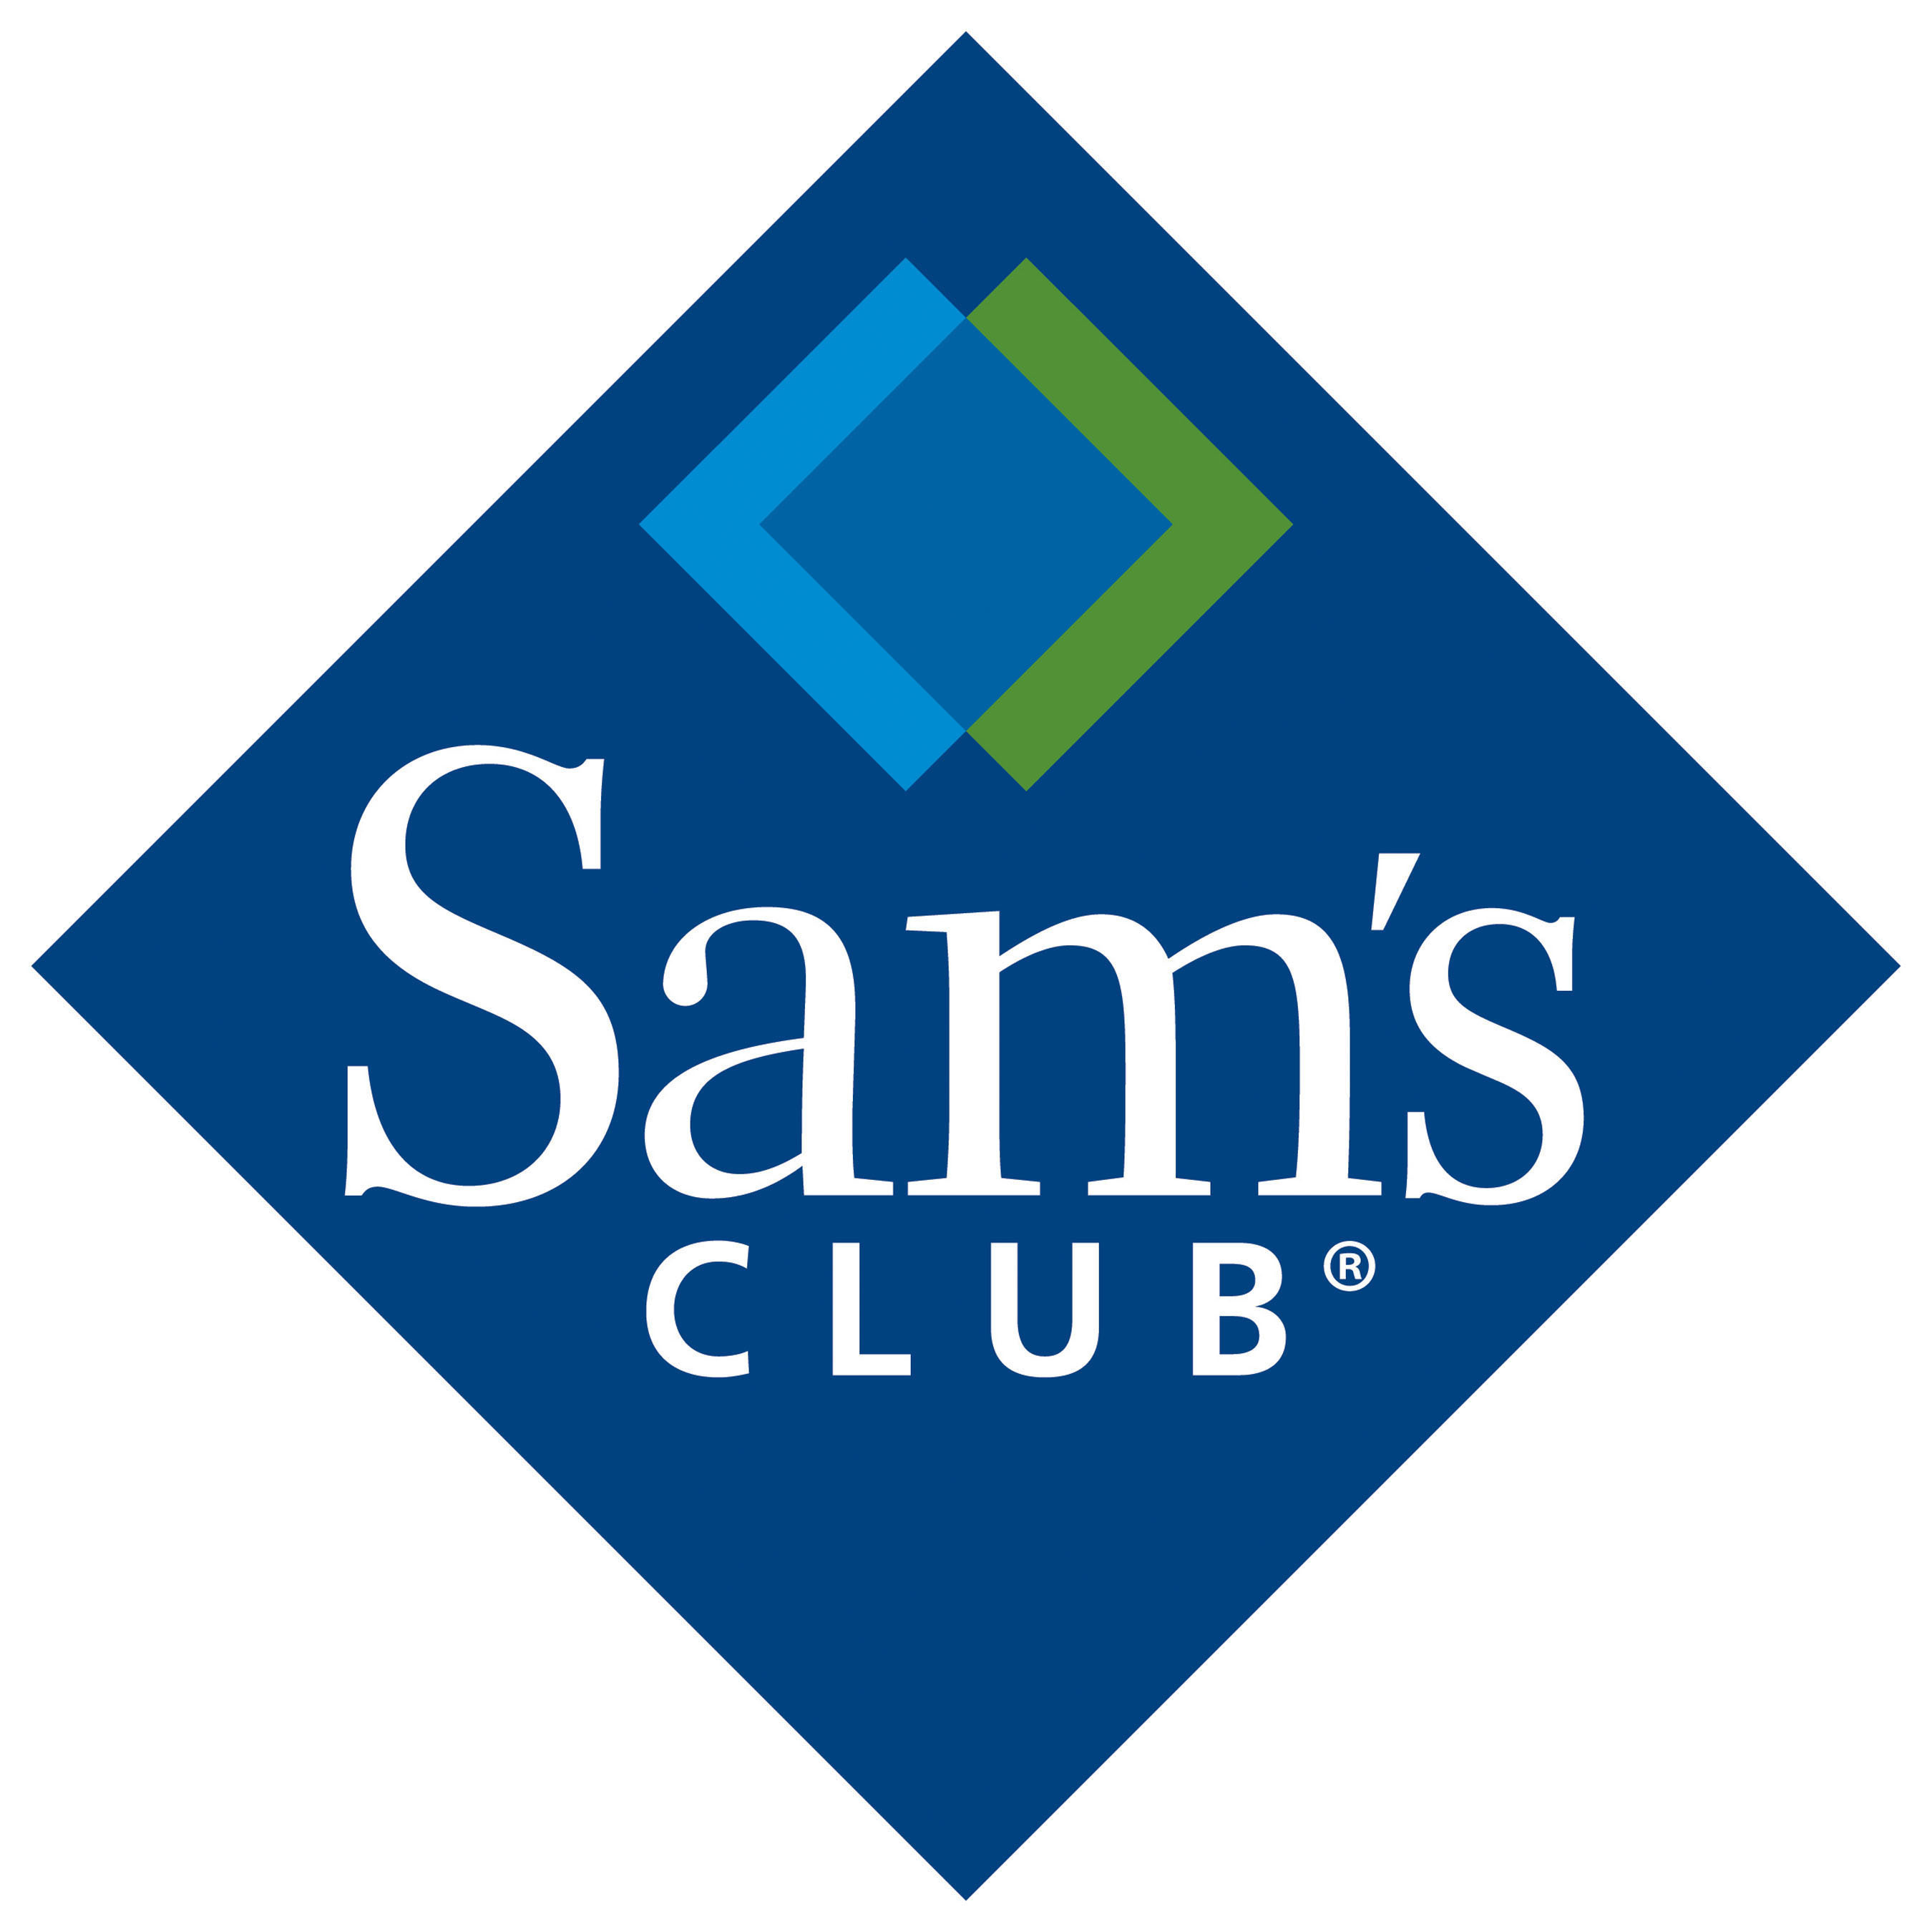 Sam's Club Opens in Rock Hill with Added Value for Members